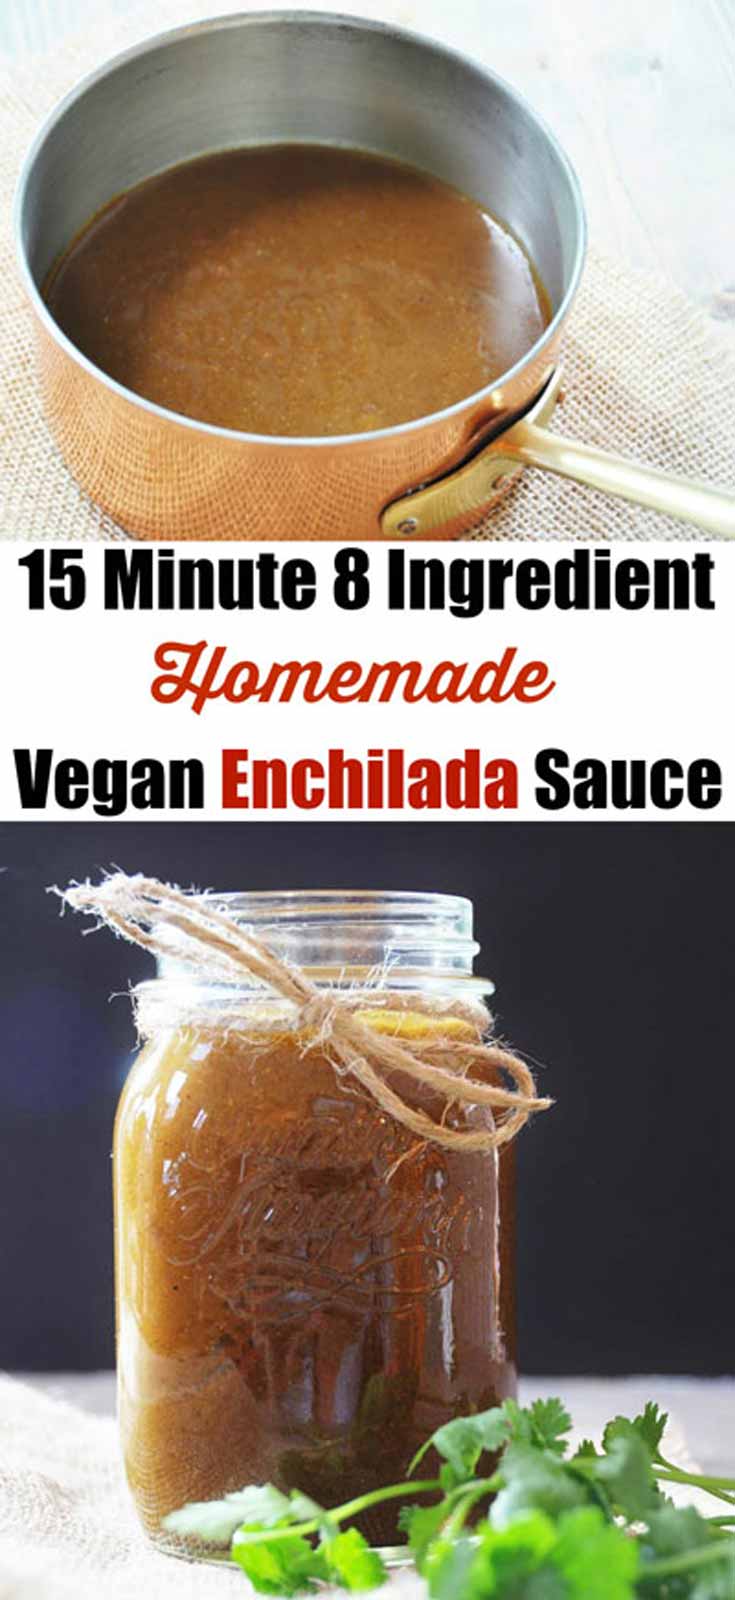 Homemade Vegan Enchilada Sauce! Only 15 minutes and 8 ingredients! 